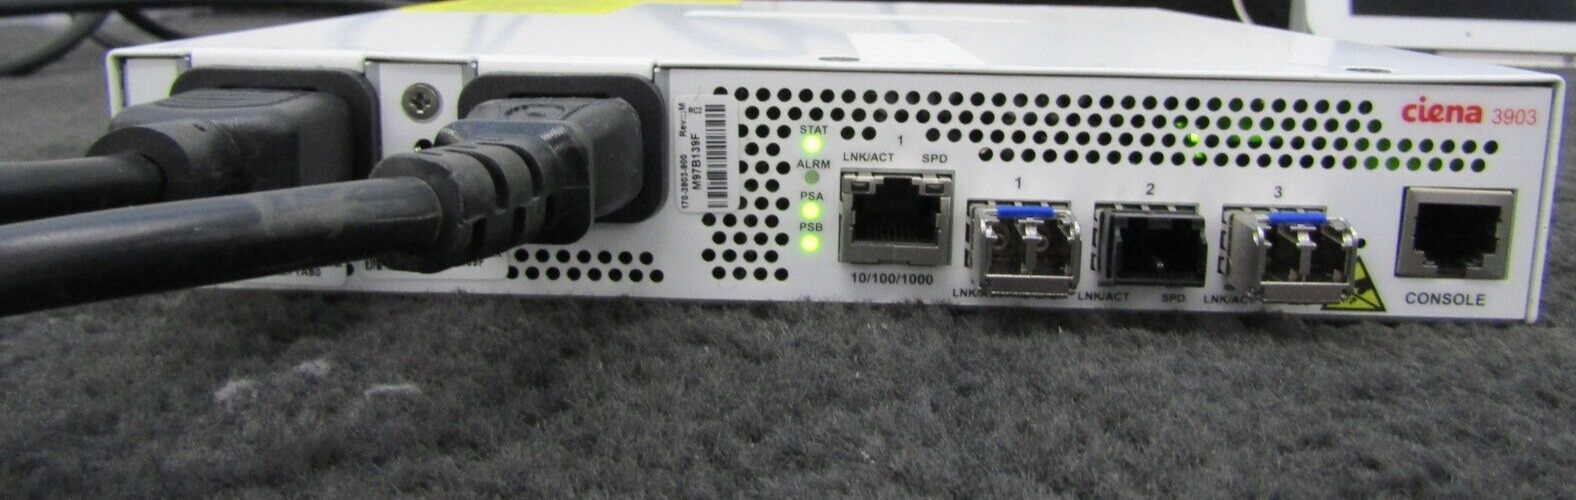 Ciena 3903 170-3930-900 Service Delivery Switch Network - No power cord